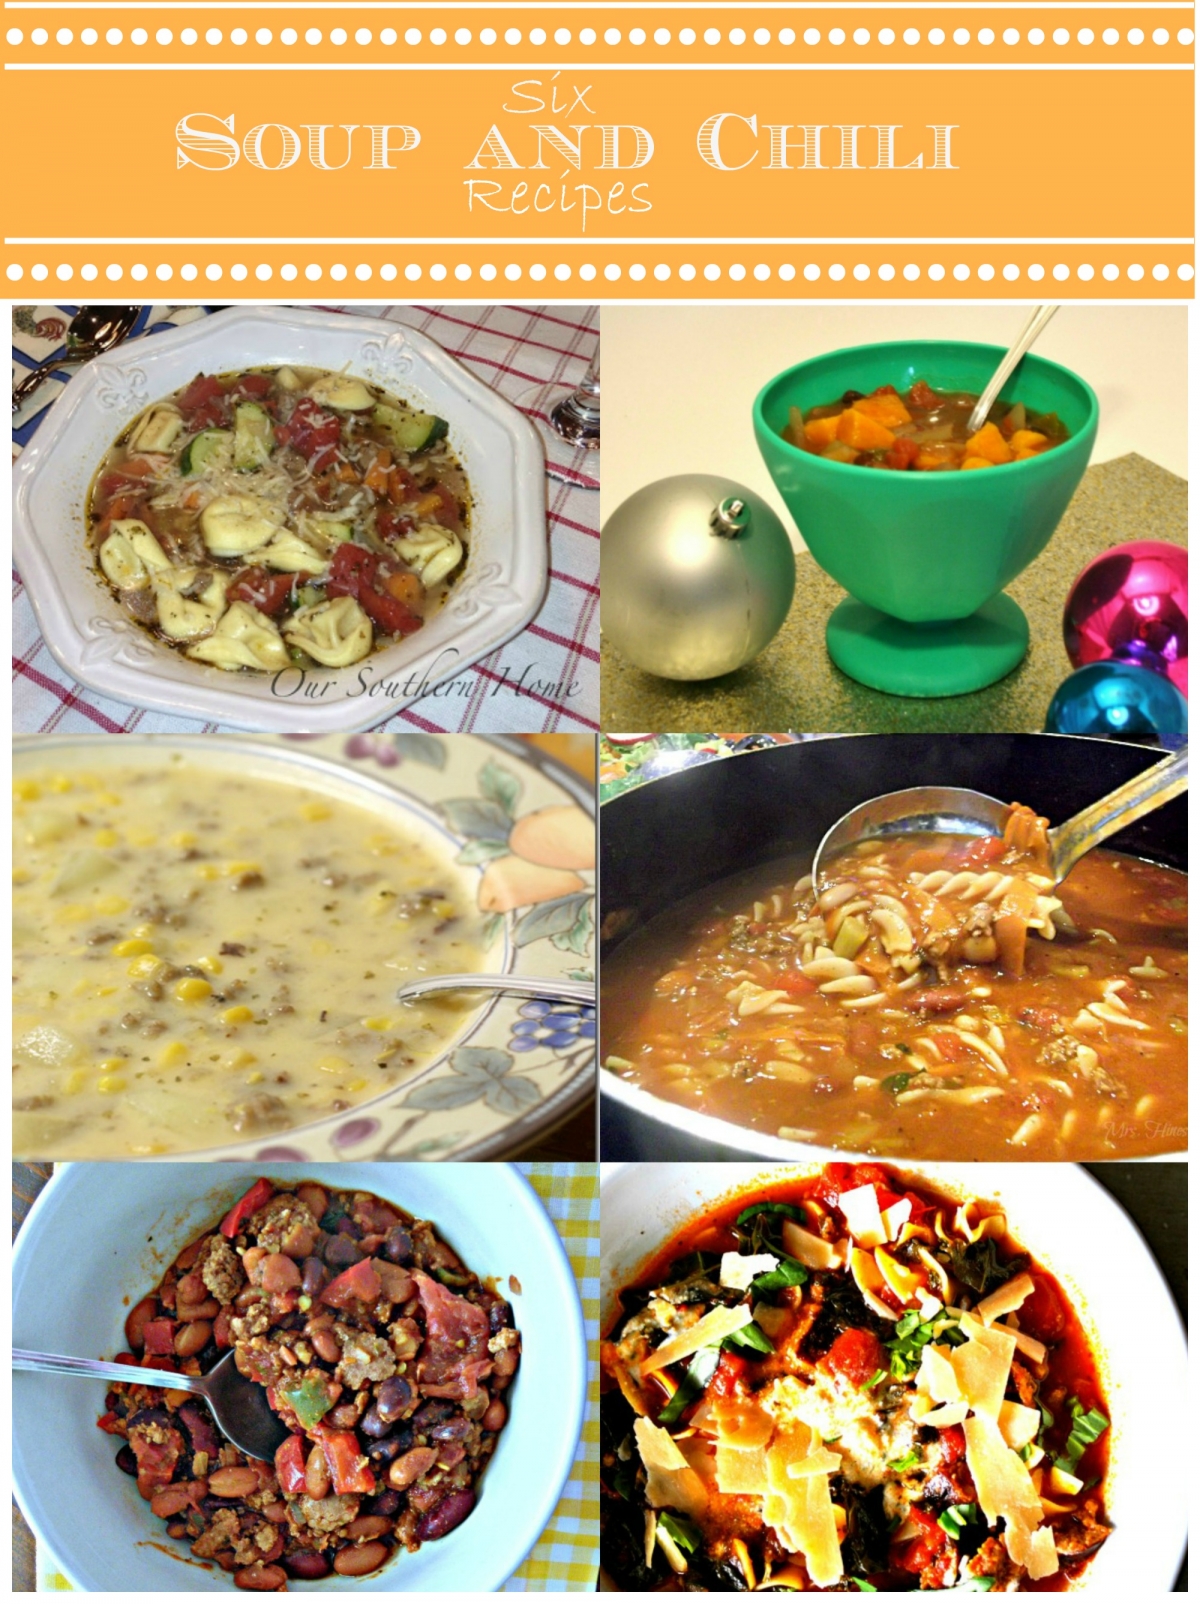 Cold Weather Soup and Chili Recipes - Rhapsody in Rooms